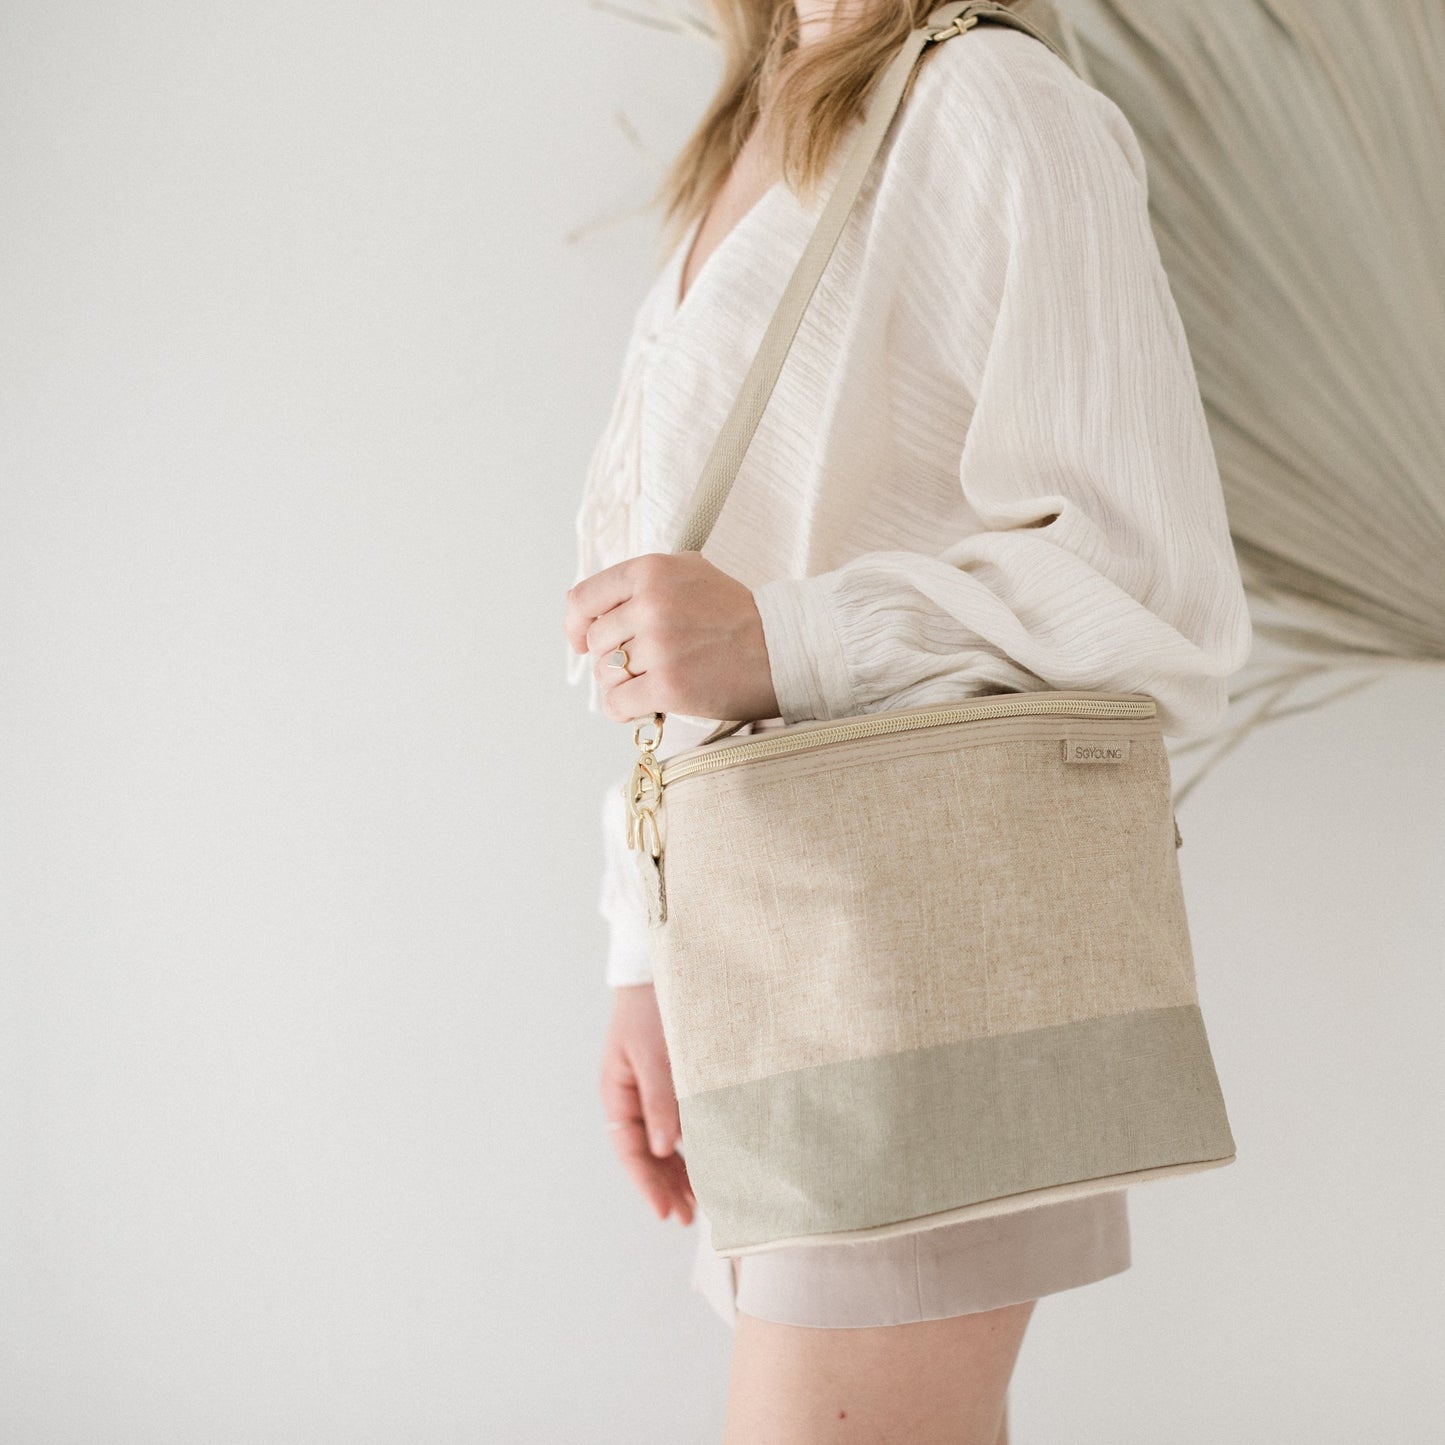 SoYoung Insulated Lunch Bag Cement Block Linen Singapore